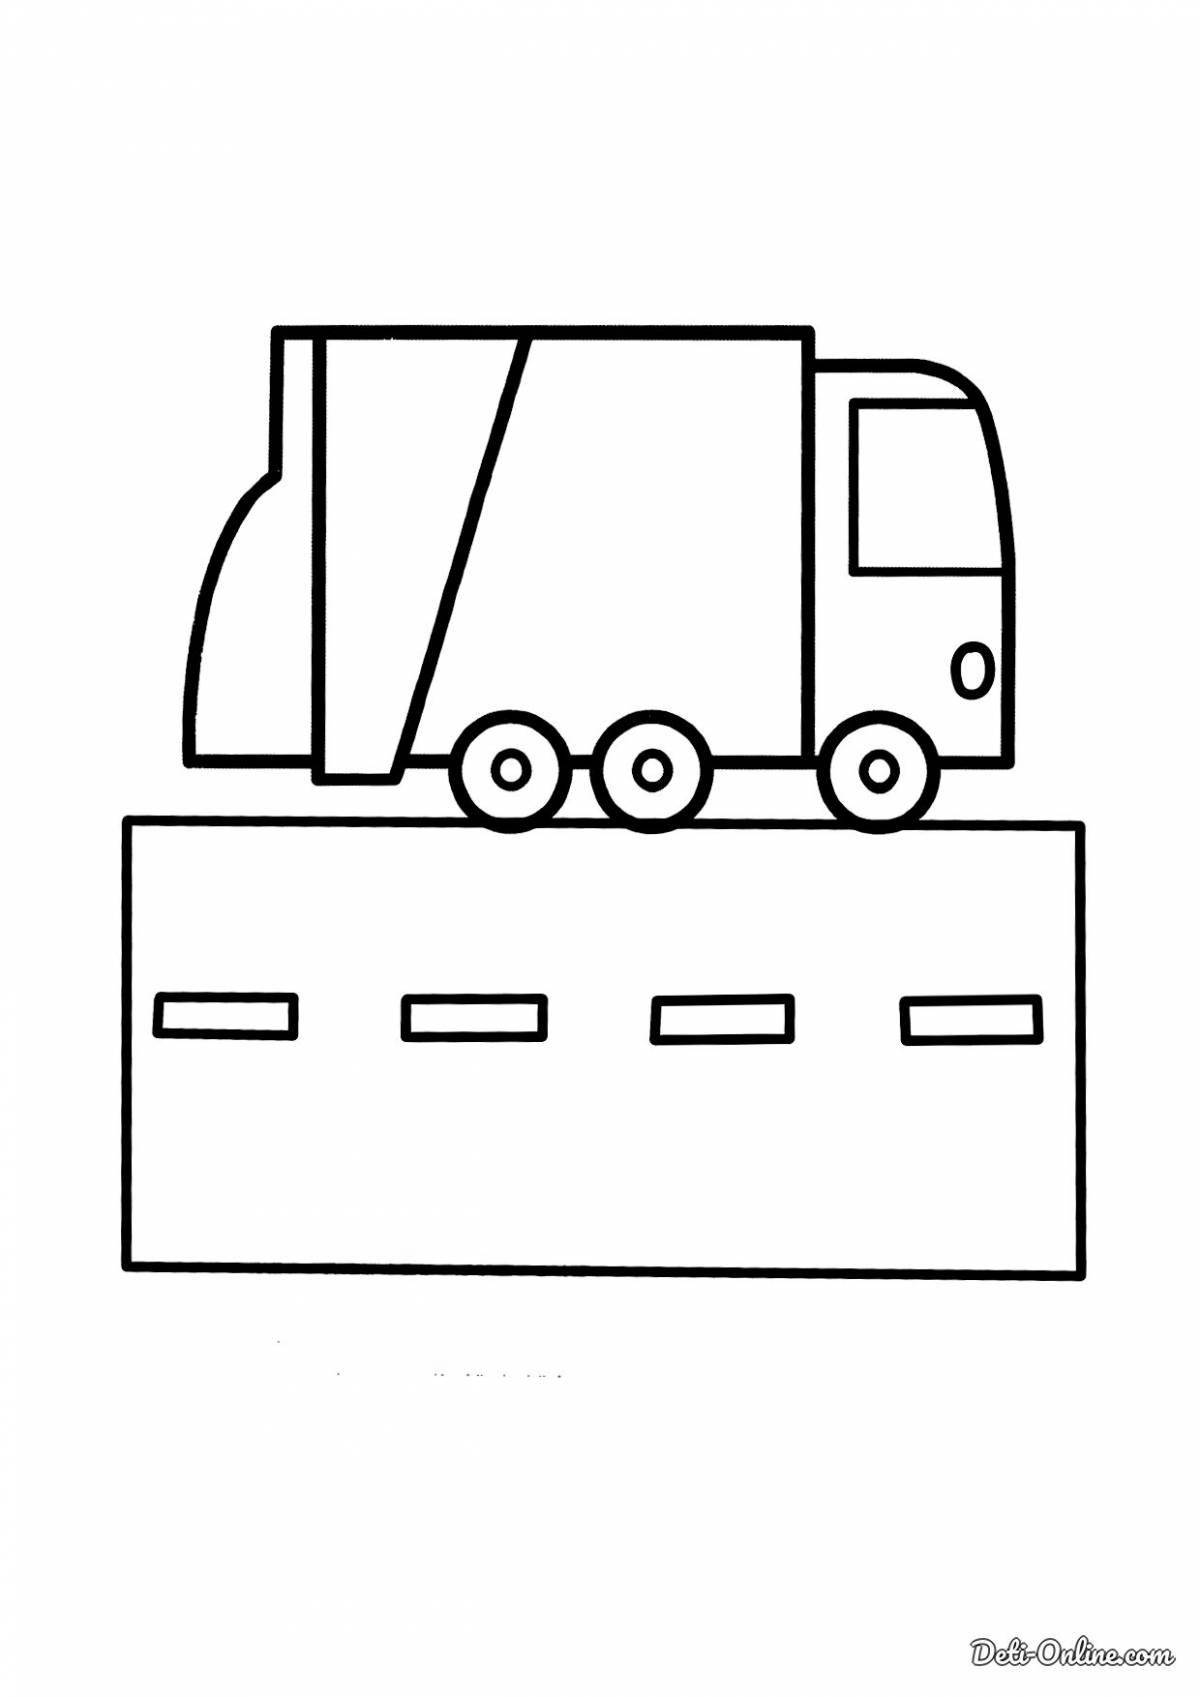 Distinctive garbage truck coloring page for 3-4 year olds